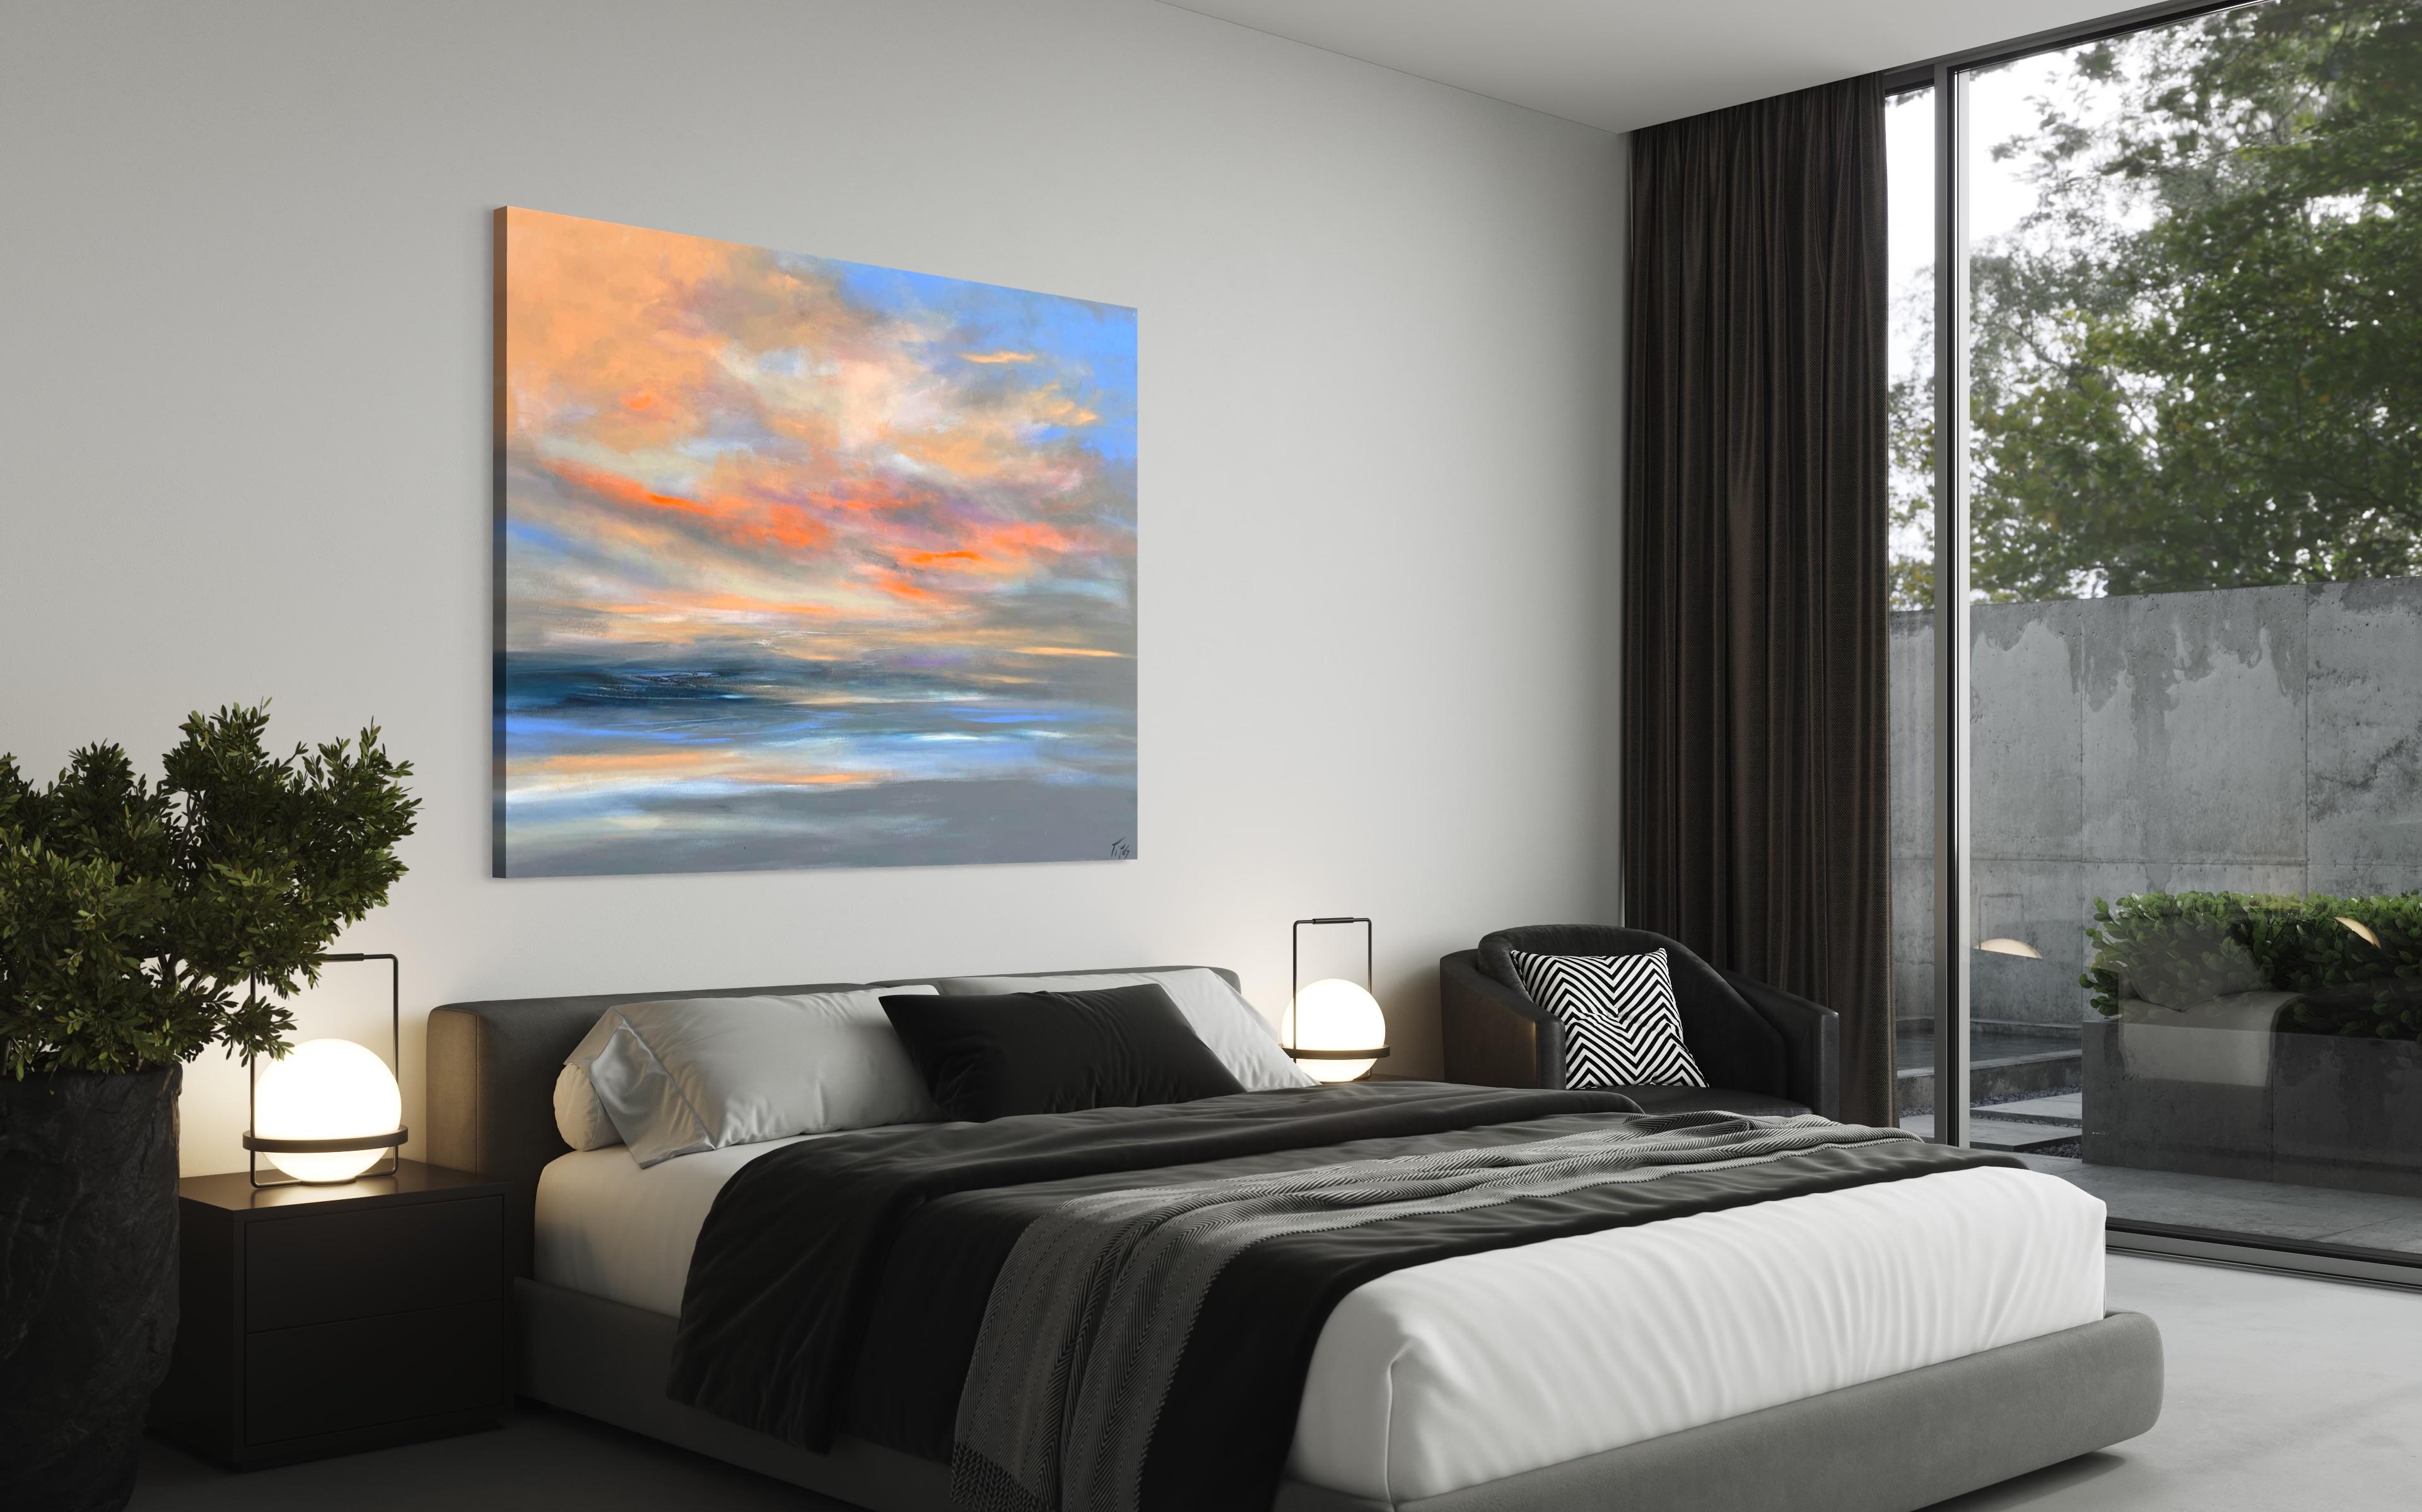 'Silence' - Sunset Over the Ocean - Large Abstract Expressionist Seascape 5